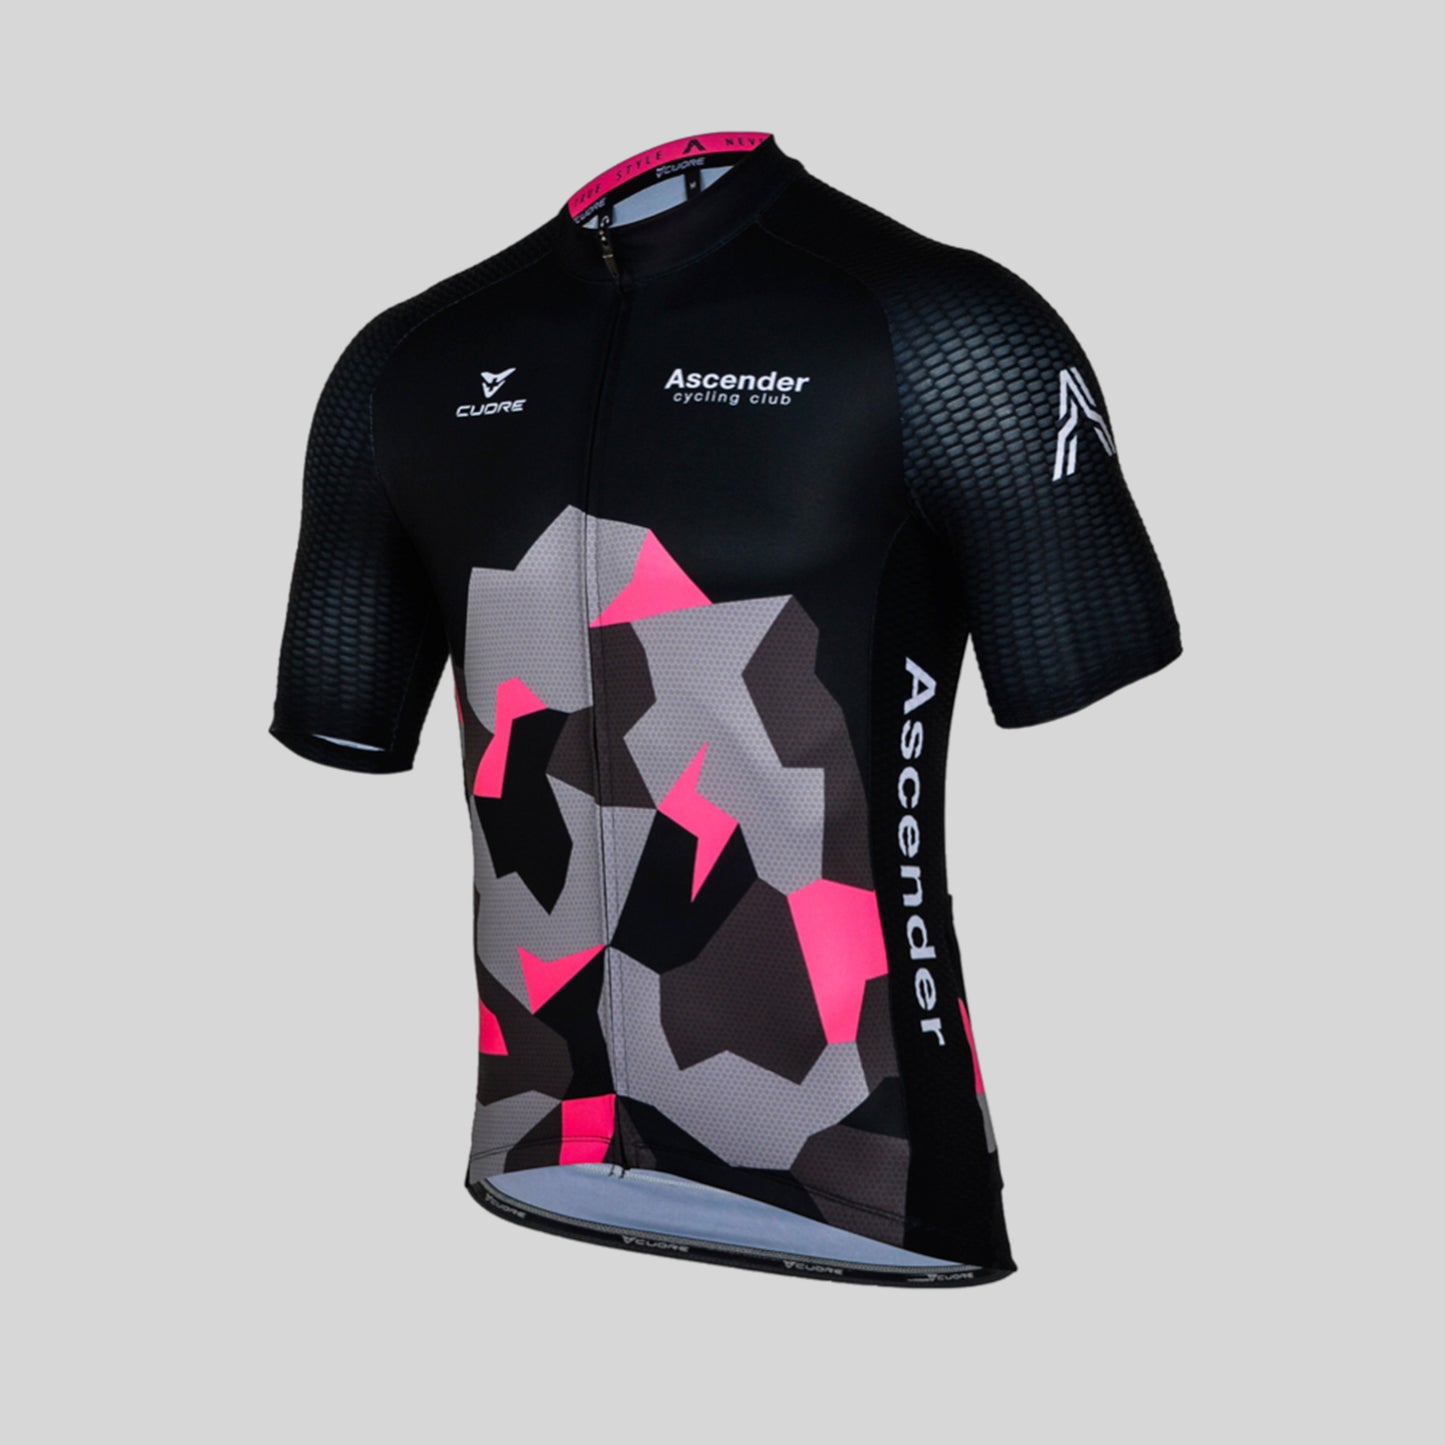 Lightning Bolt Camo Neon Pink Short Sleeves Jersey from Ascender Cycling Club 3D Front View